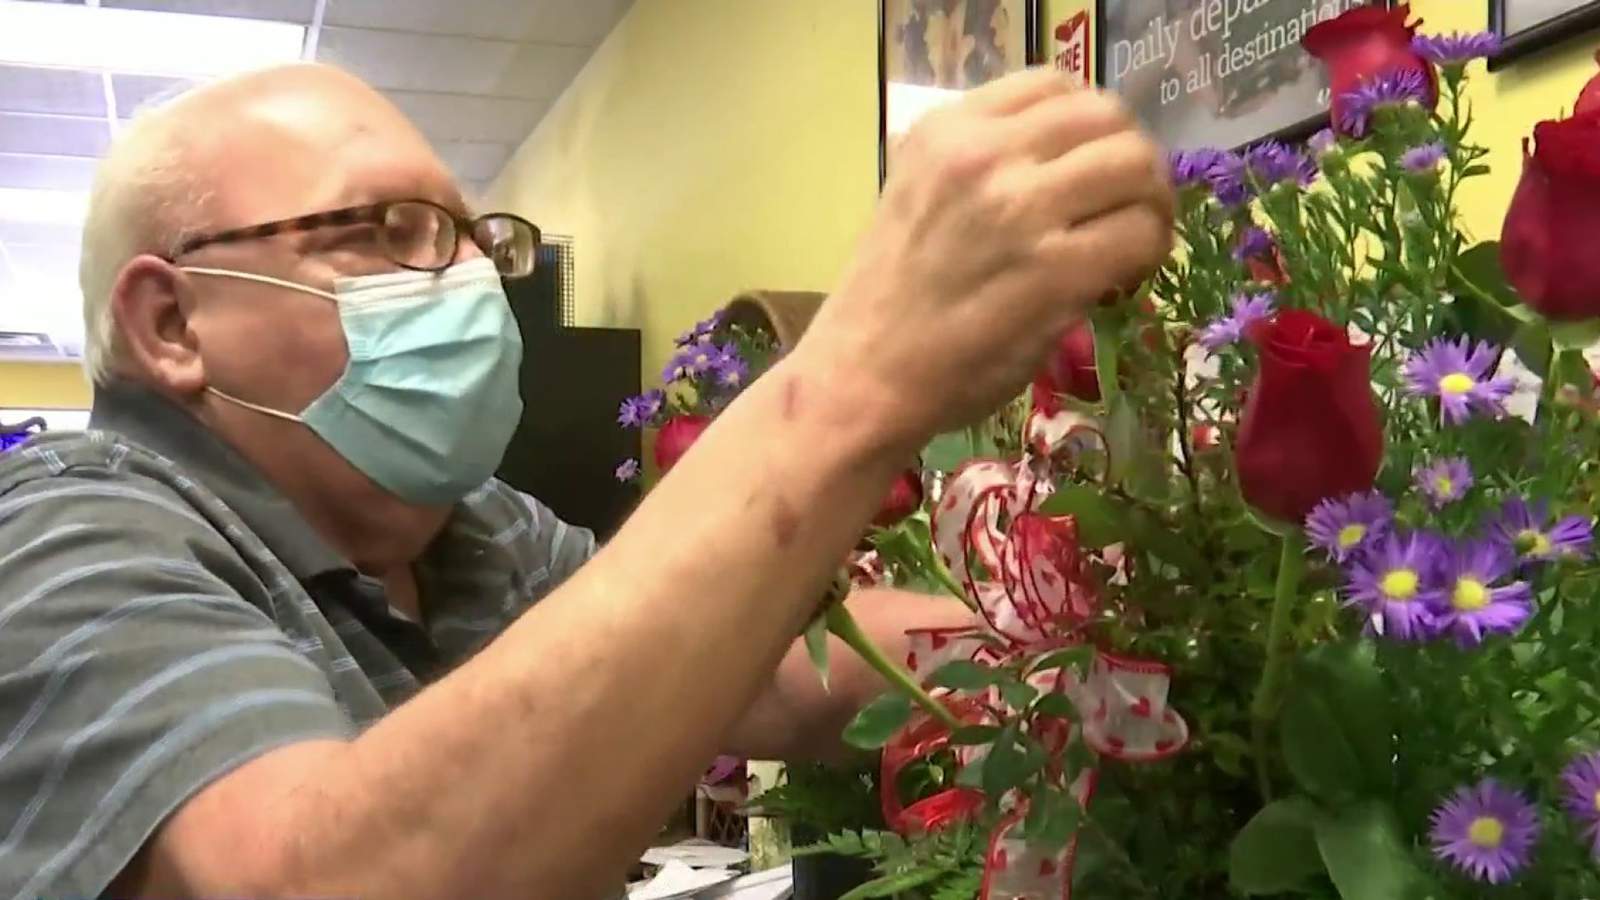 ‘This is our biggest weekend of the year:’ Orlando florist hurt by pandemic hopes business blooms for Valentine’s Day